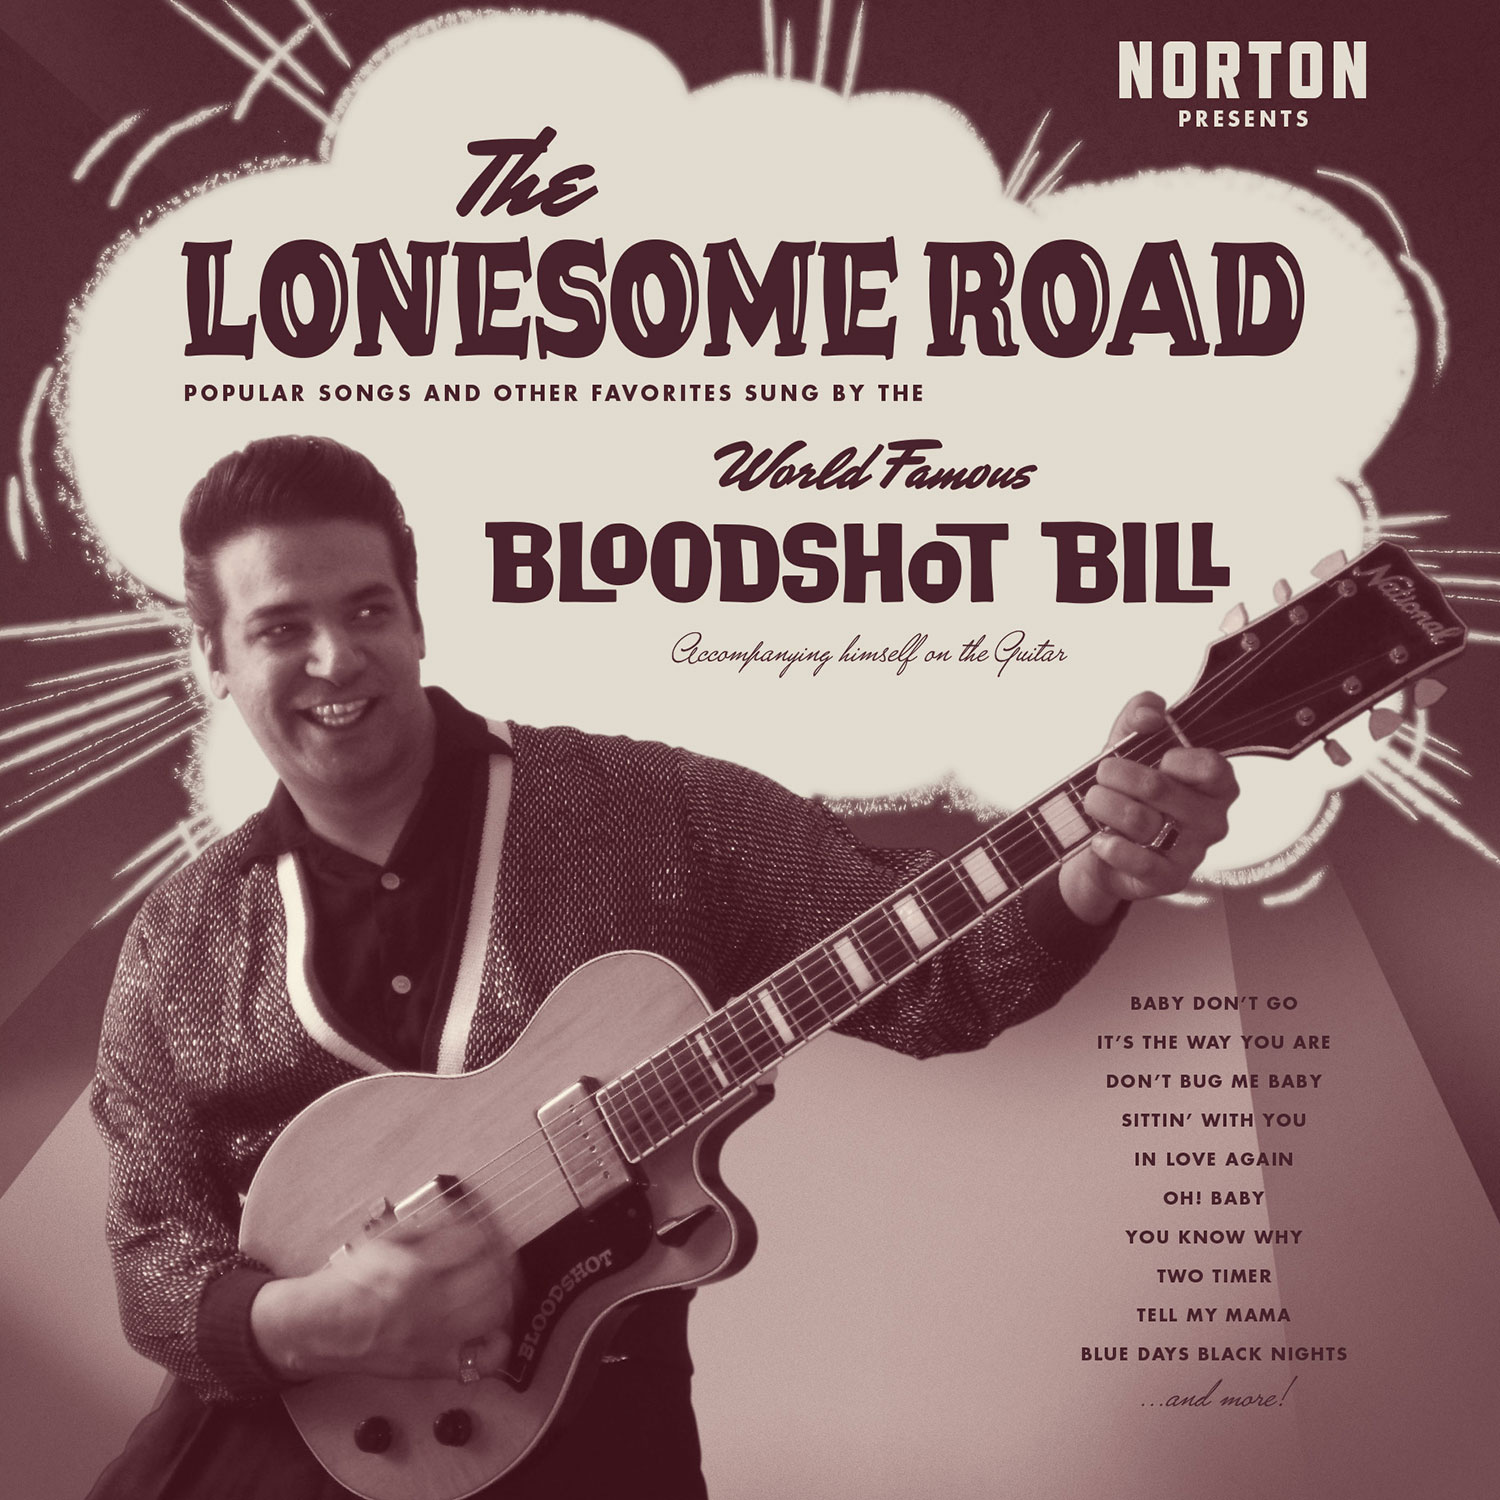 Bloodshot Bill - The Lonesome Road LP cover